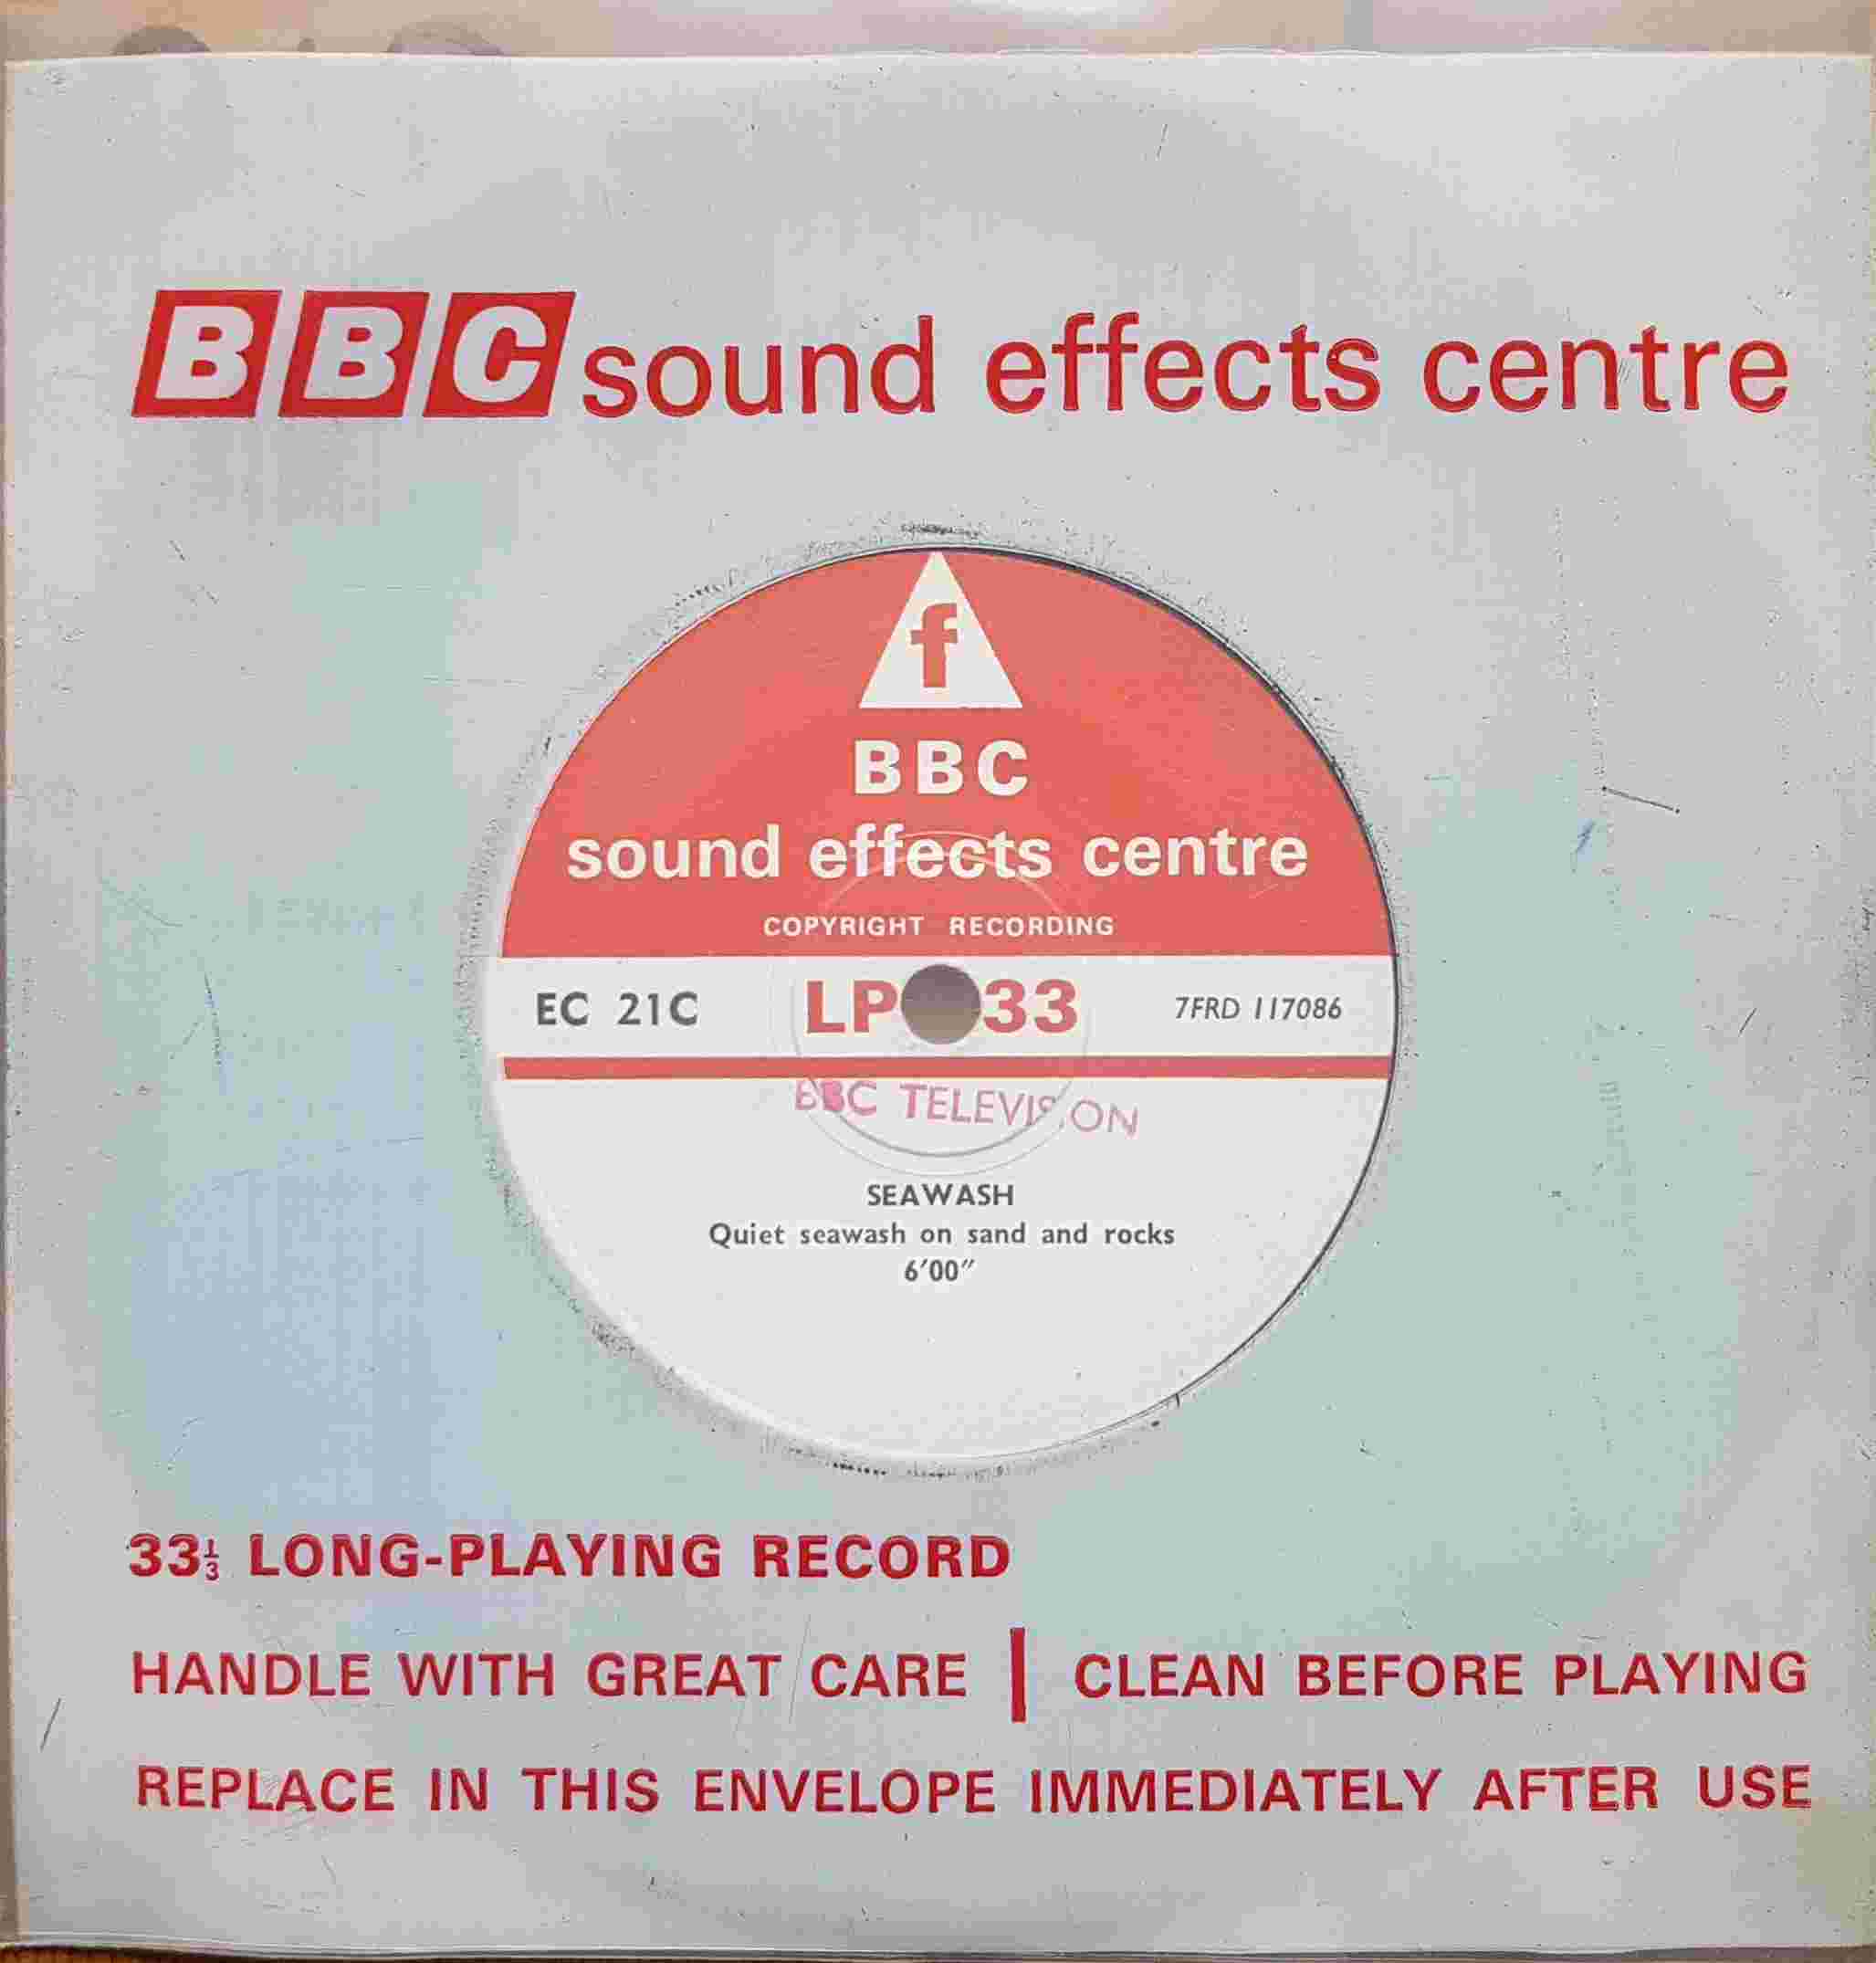 Picture of EC 21C Seawash by artist Not registered from the BBC singles - Records and Tapes library